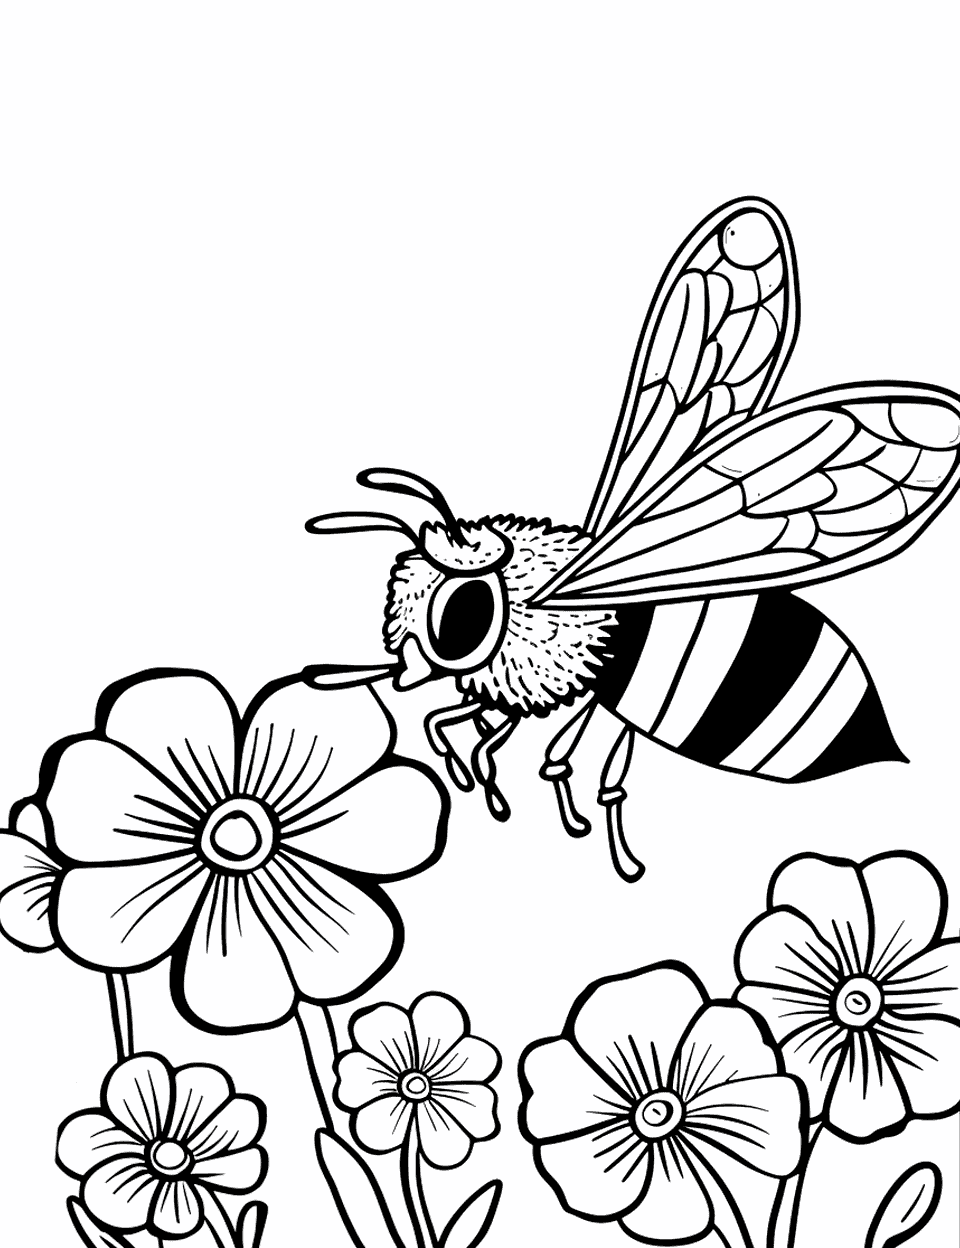 Bee and Clover Flower Coloring Page - A bee hovering over a clover flower, with a few clovers around.